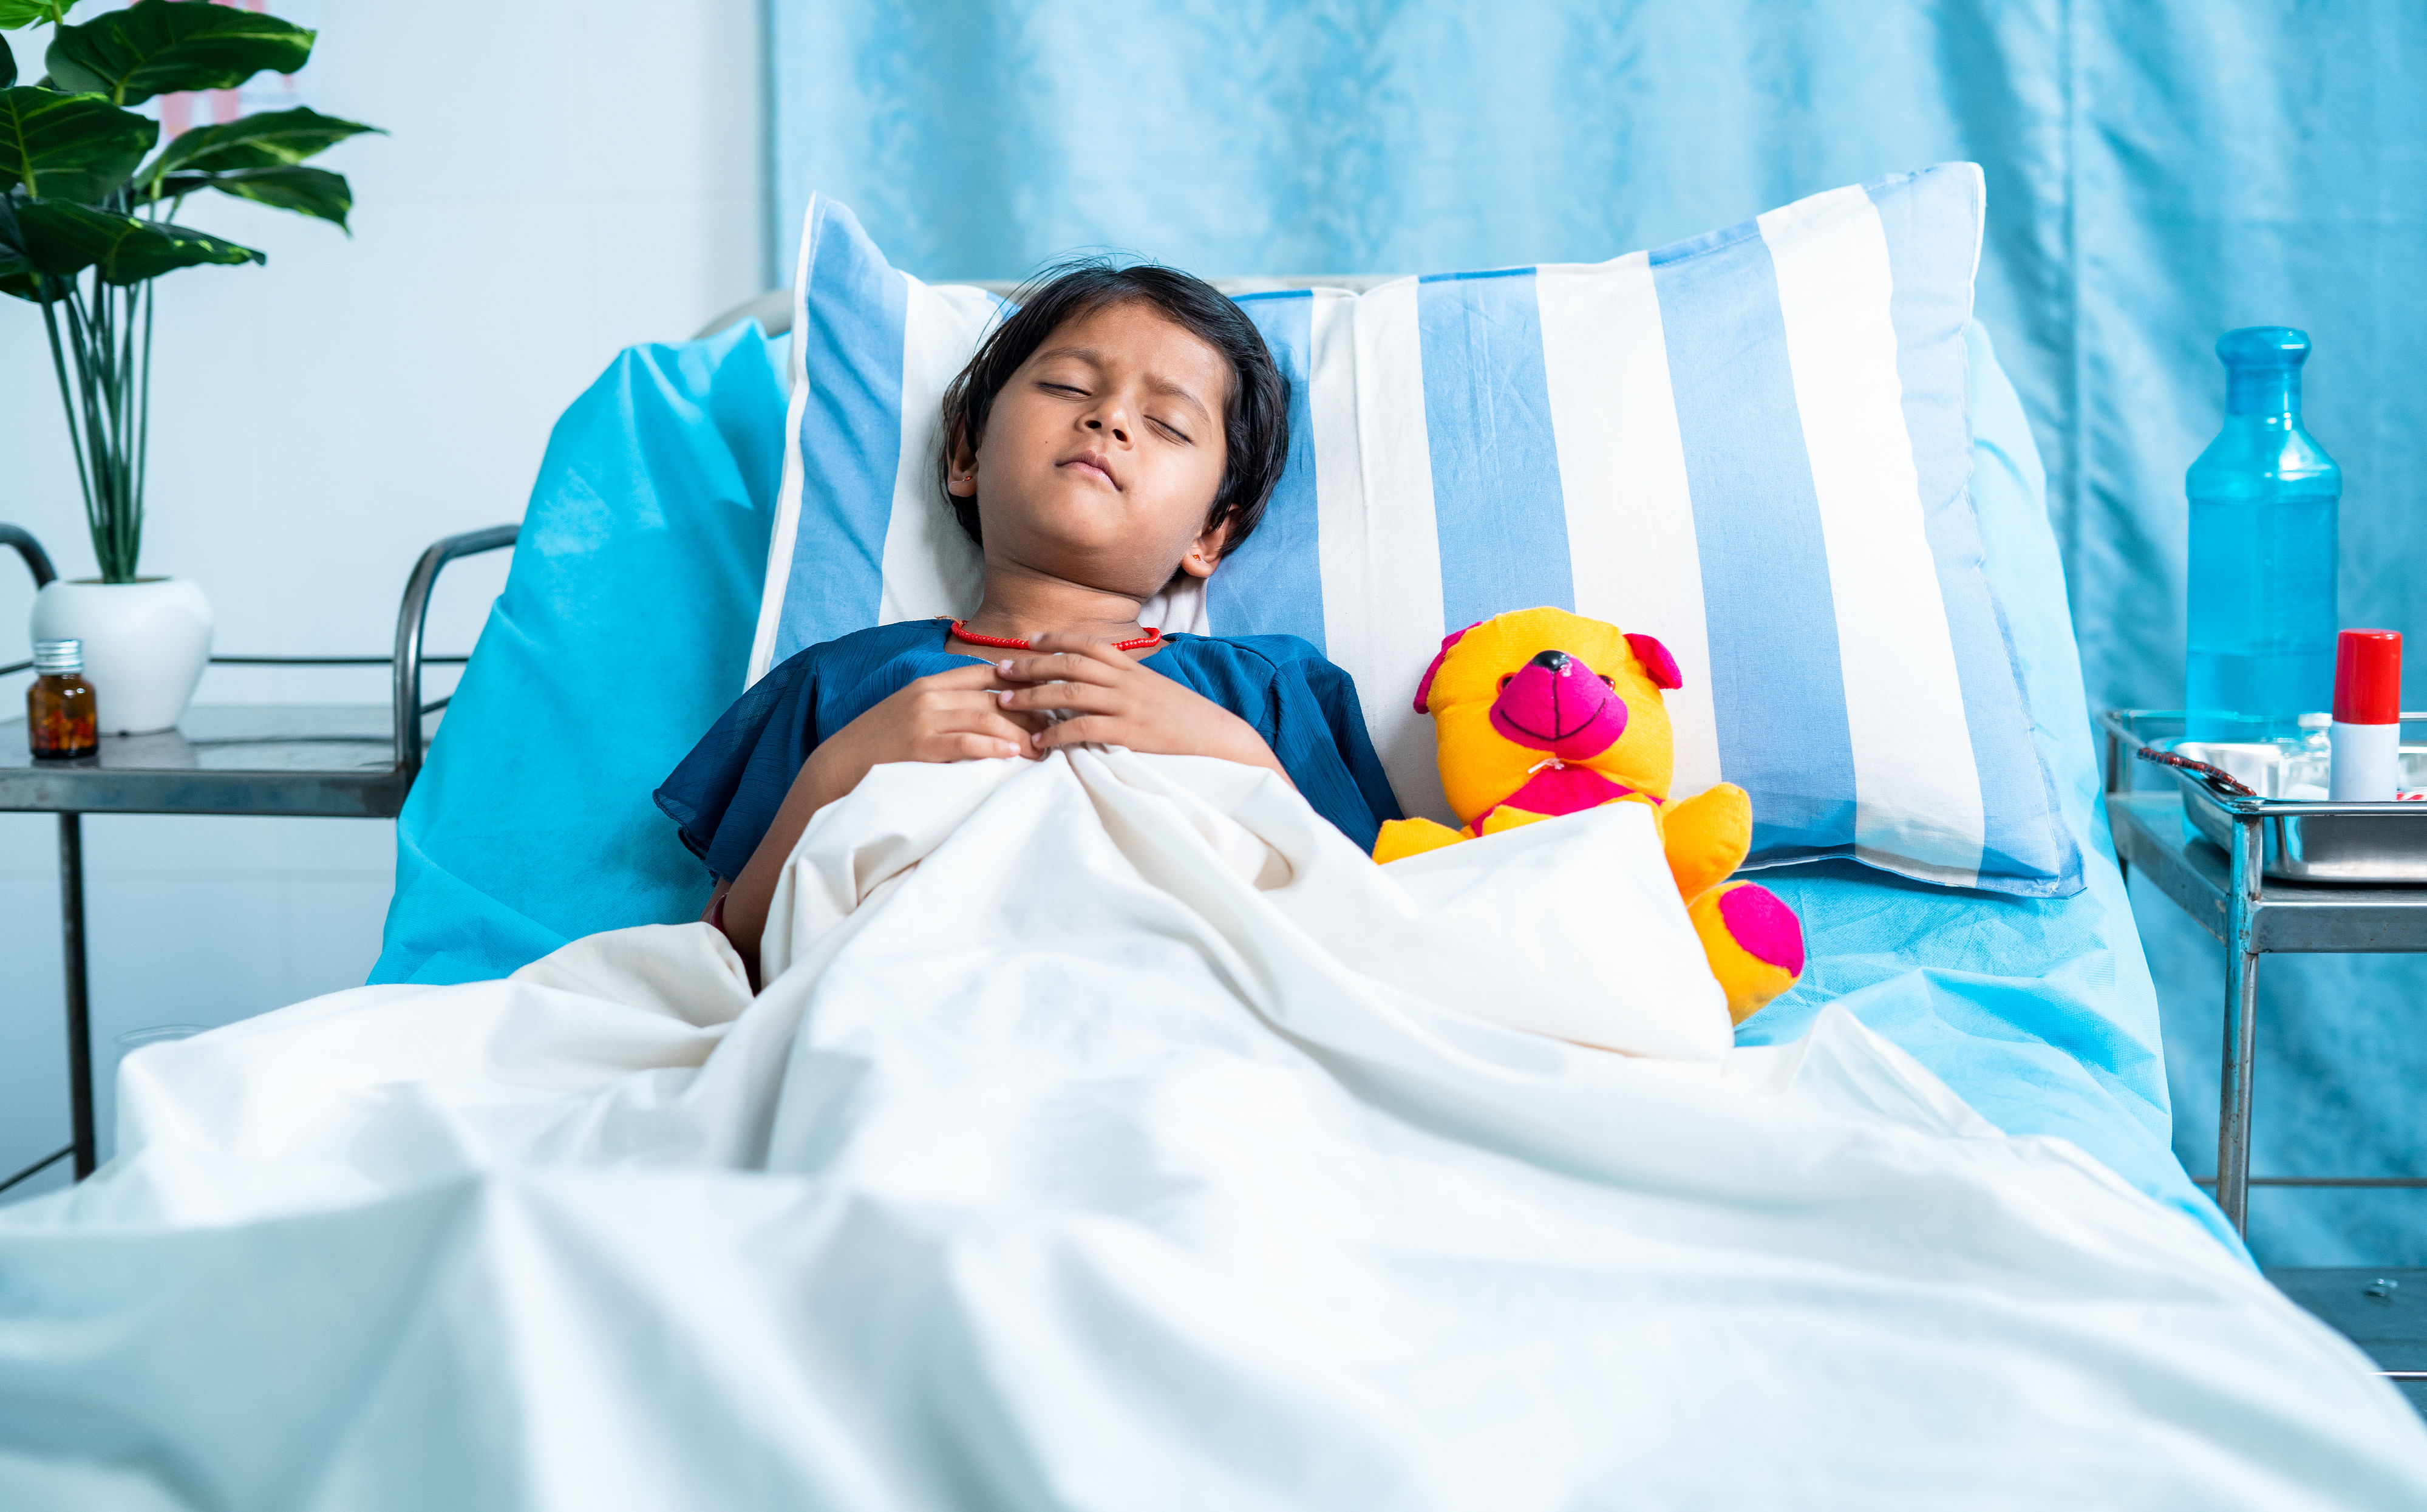 Sick girl child with teddy bear sleeping on bed at hospital - concept of medial treatment, illness and childcare
Children and Fever